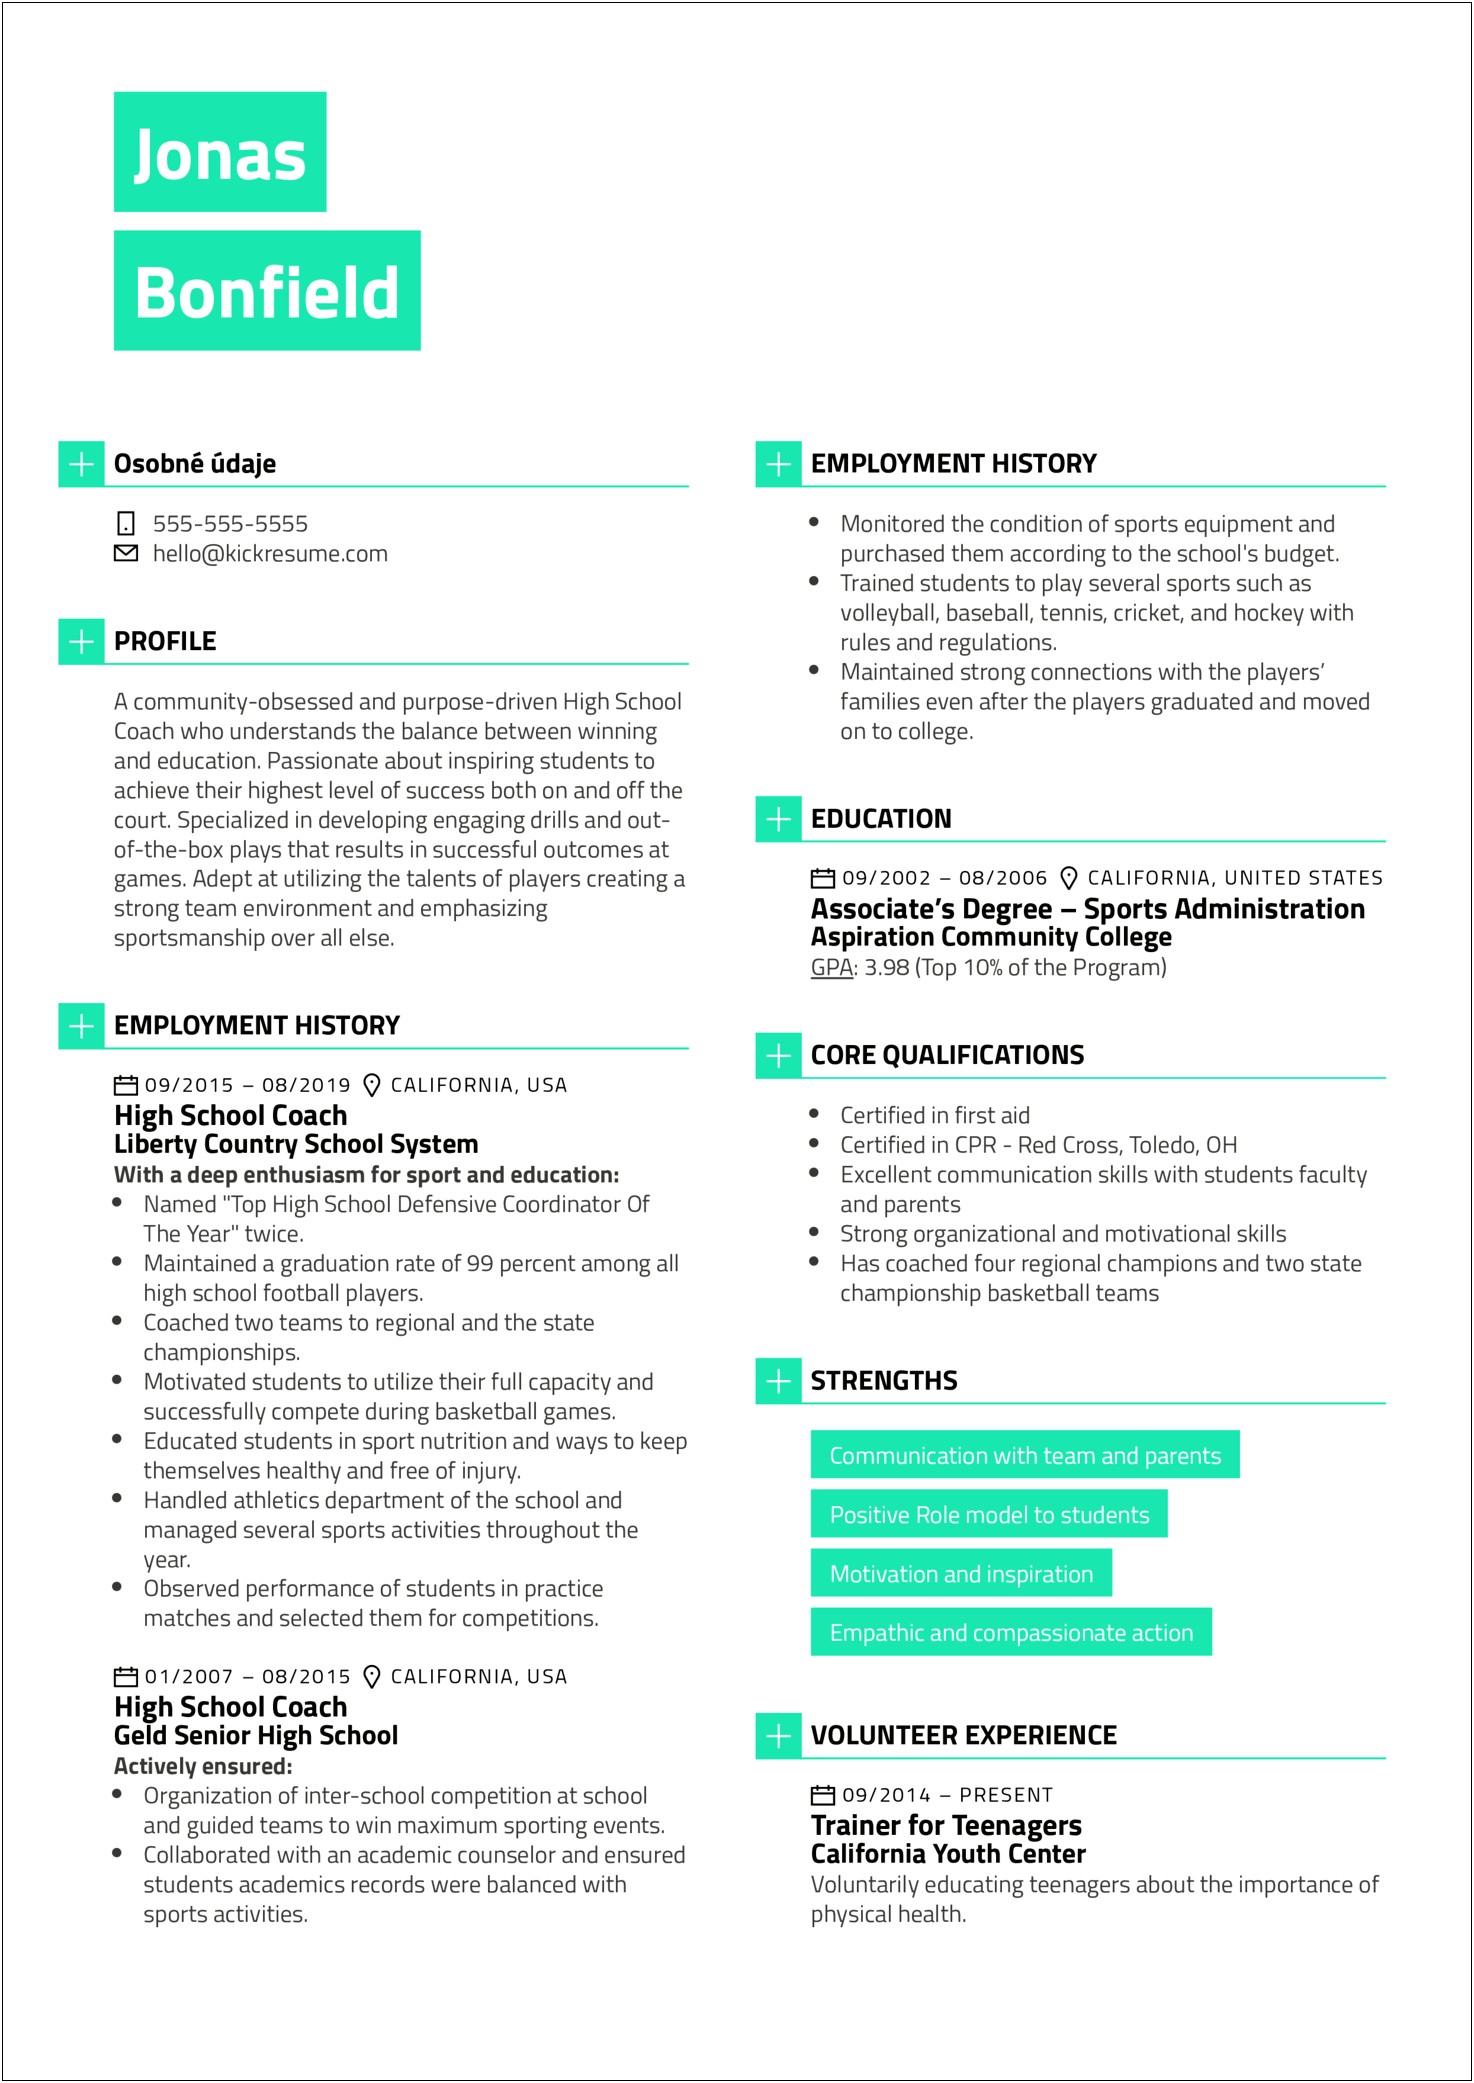 Resume Samples For Librarian Jobs In Usa